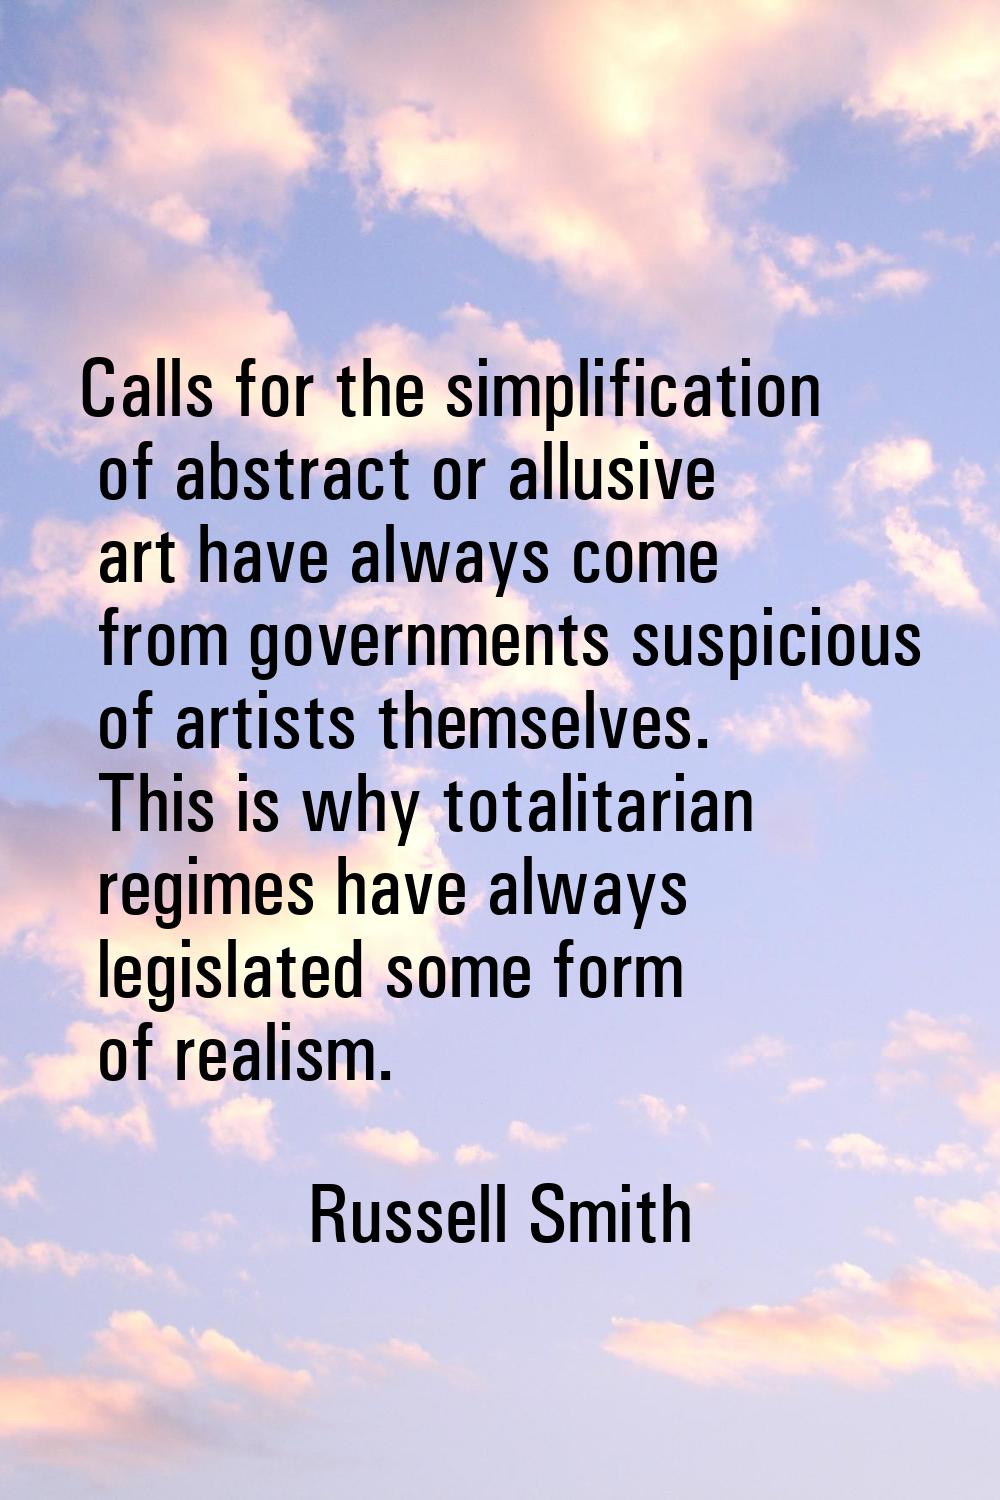 Calls for the simplification of abstract or allusive art have always come from governments suspicio